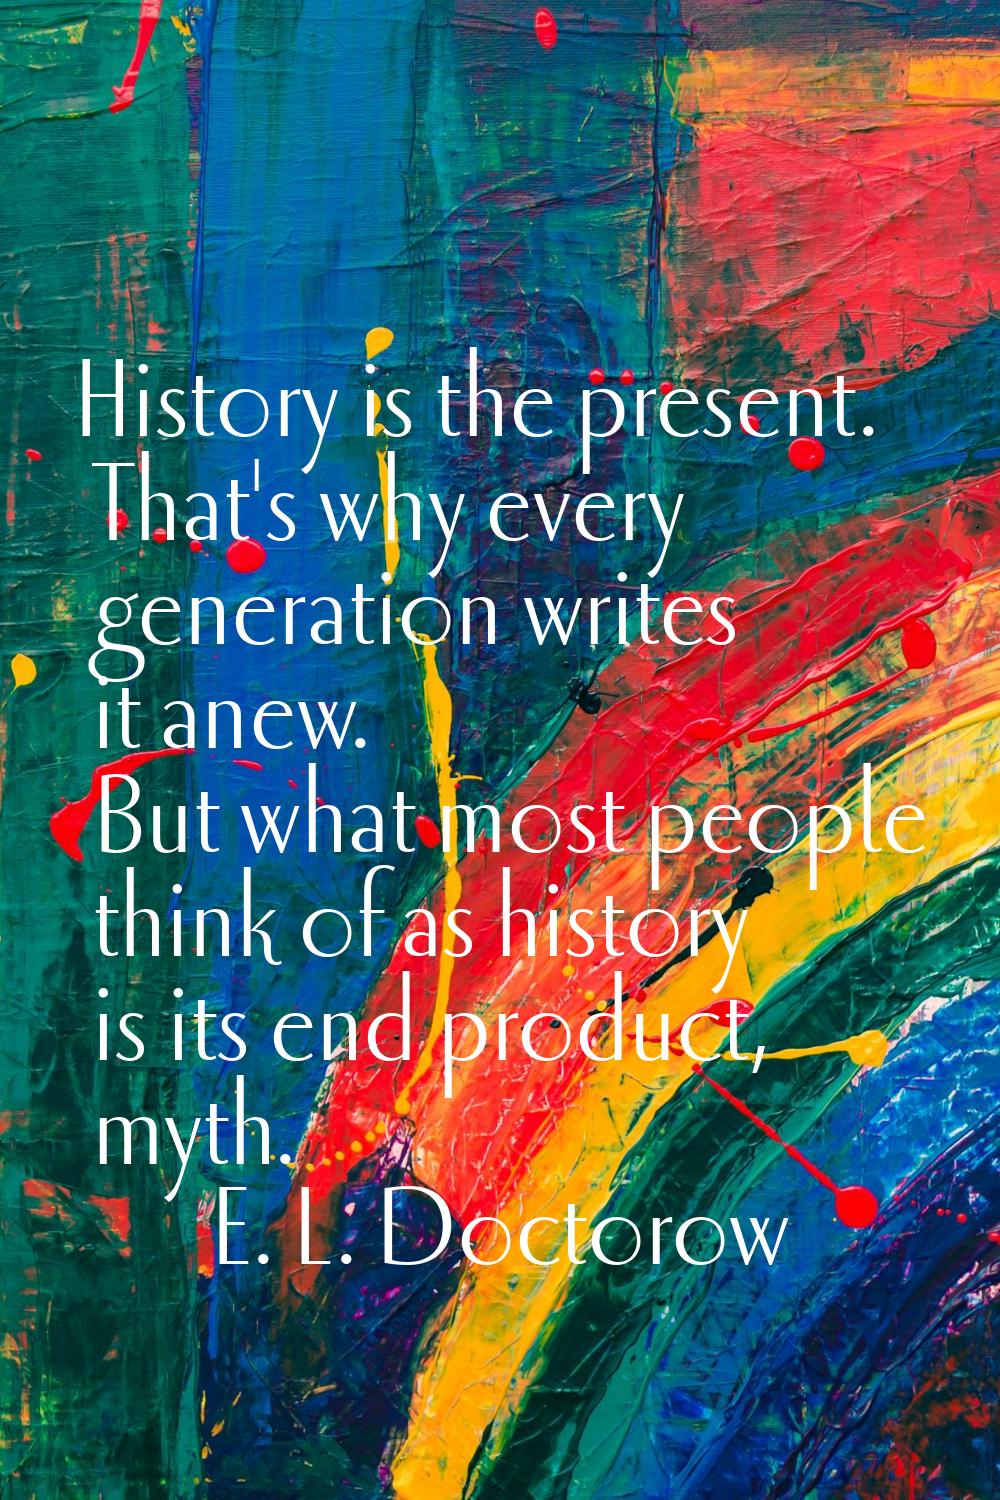 History is the present. That's why every generation writes it anew. But what most people think of a